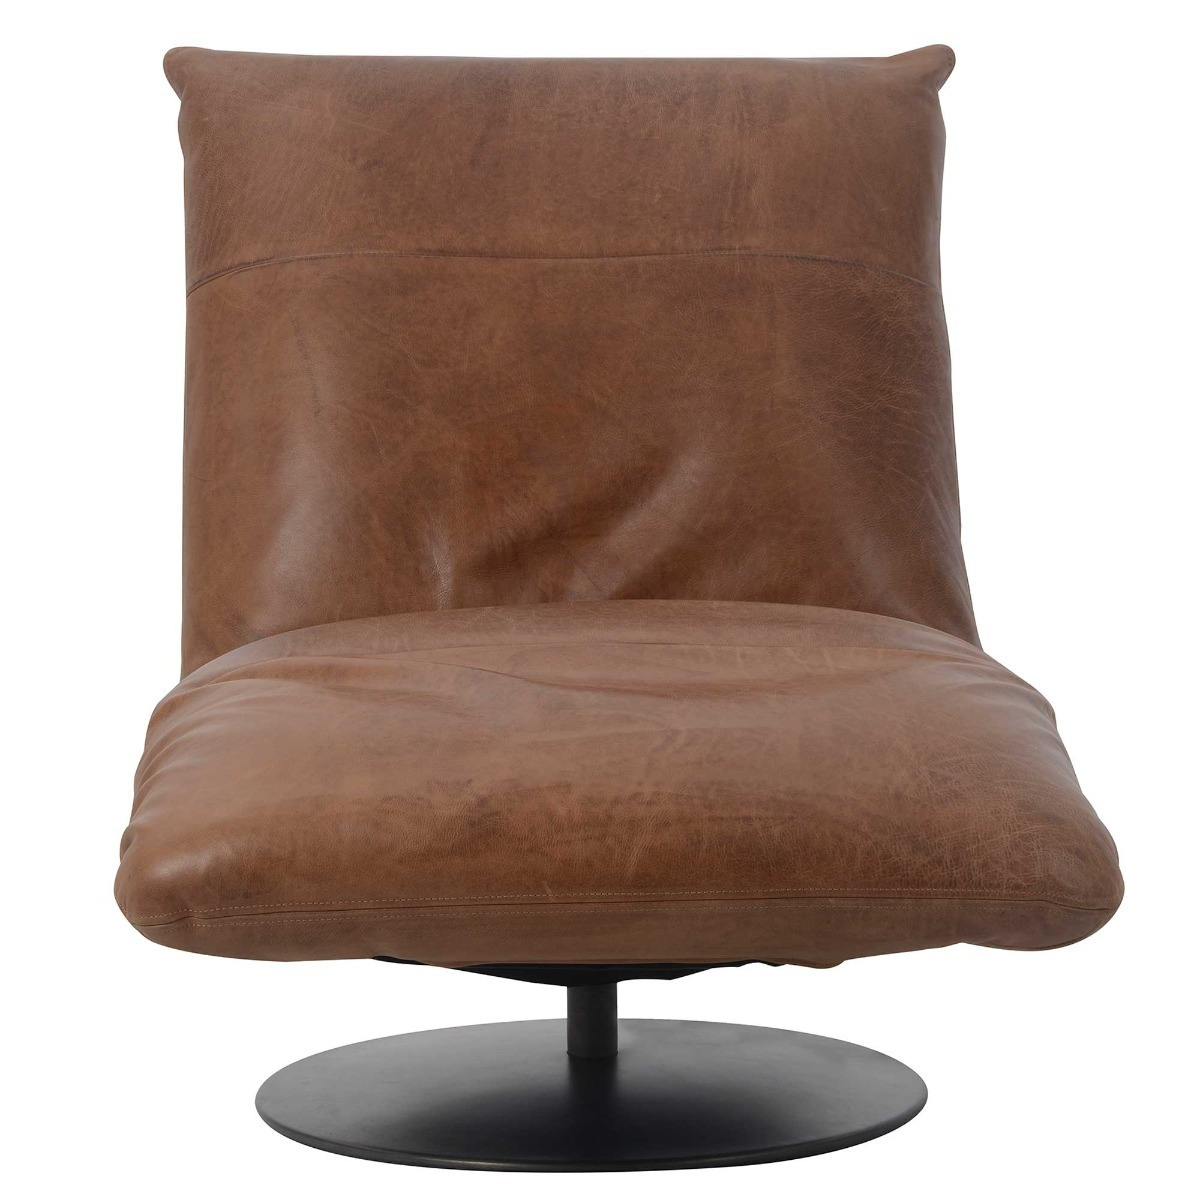 Bay Swivel Armchair, Brown Leather - Barker & Stonehouse